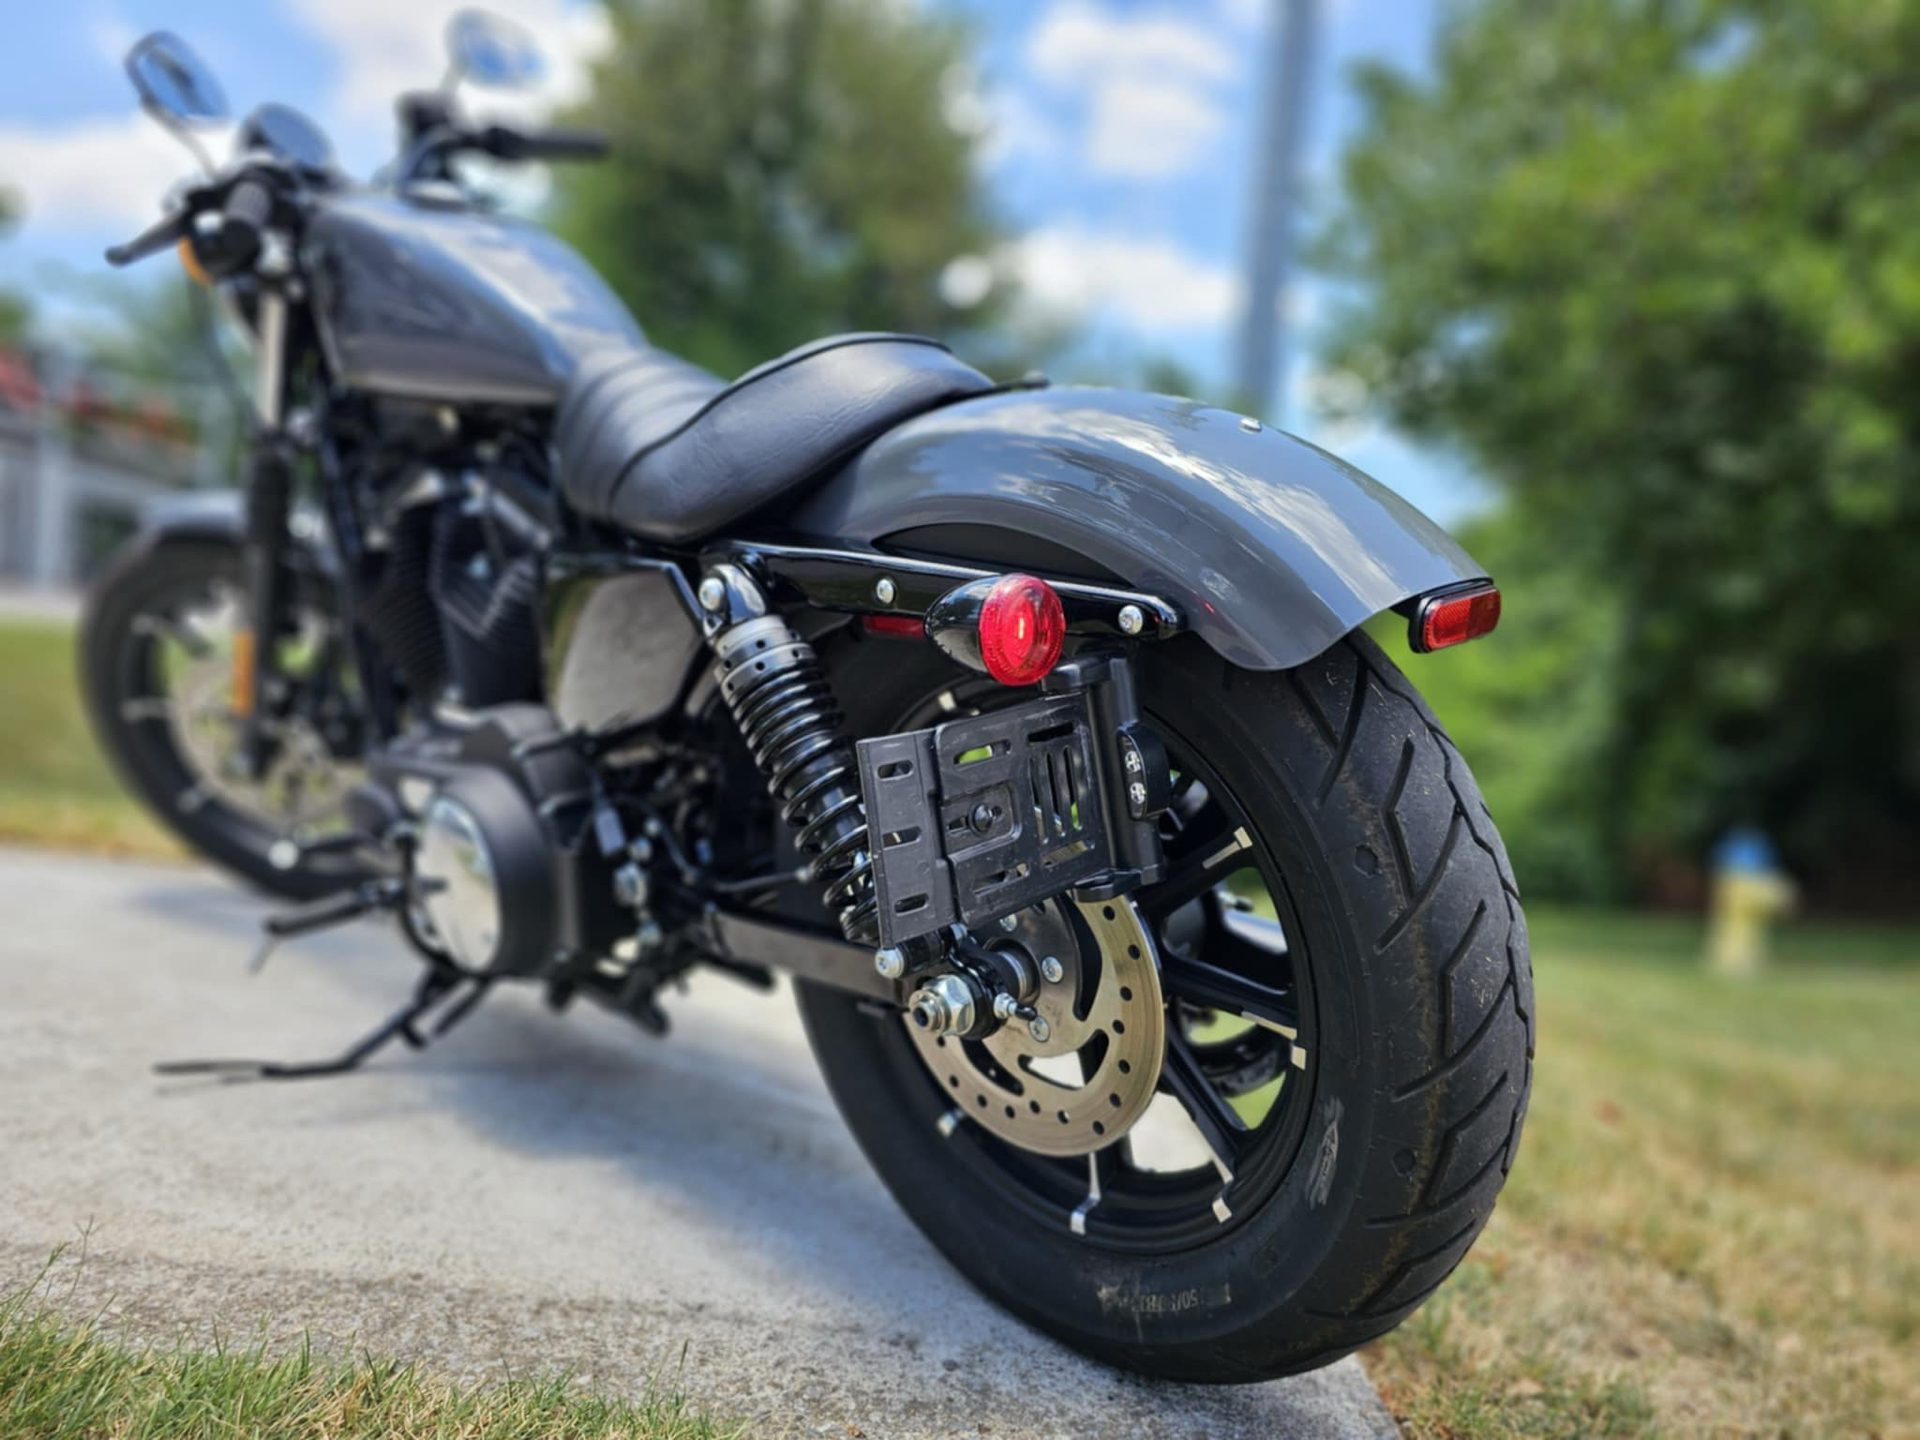 2022 Harley-Davidson Iron 883™ in Franklin, Tennessee - Photo 10